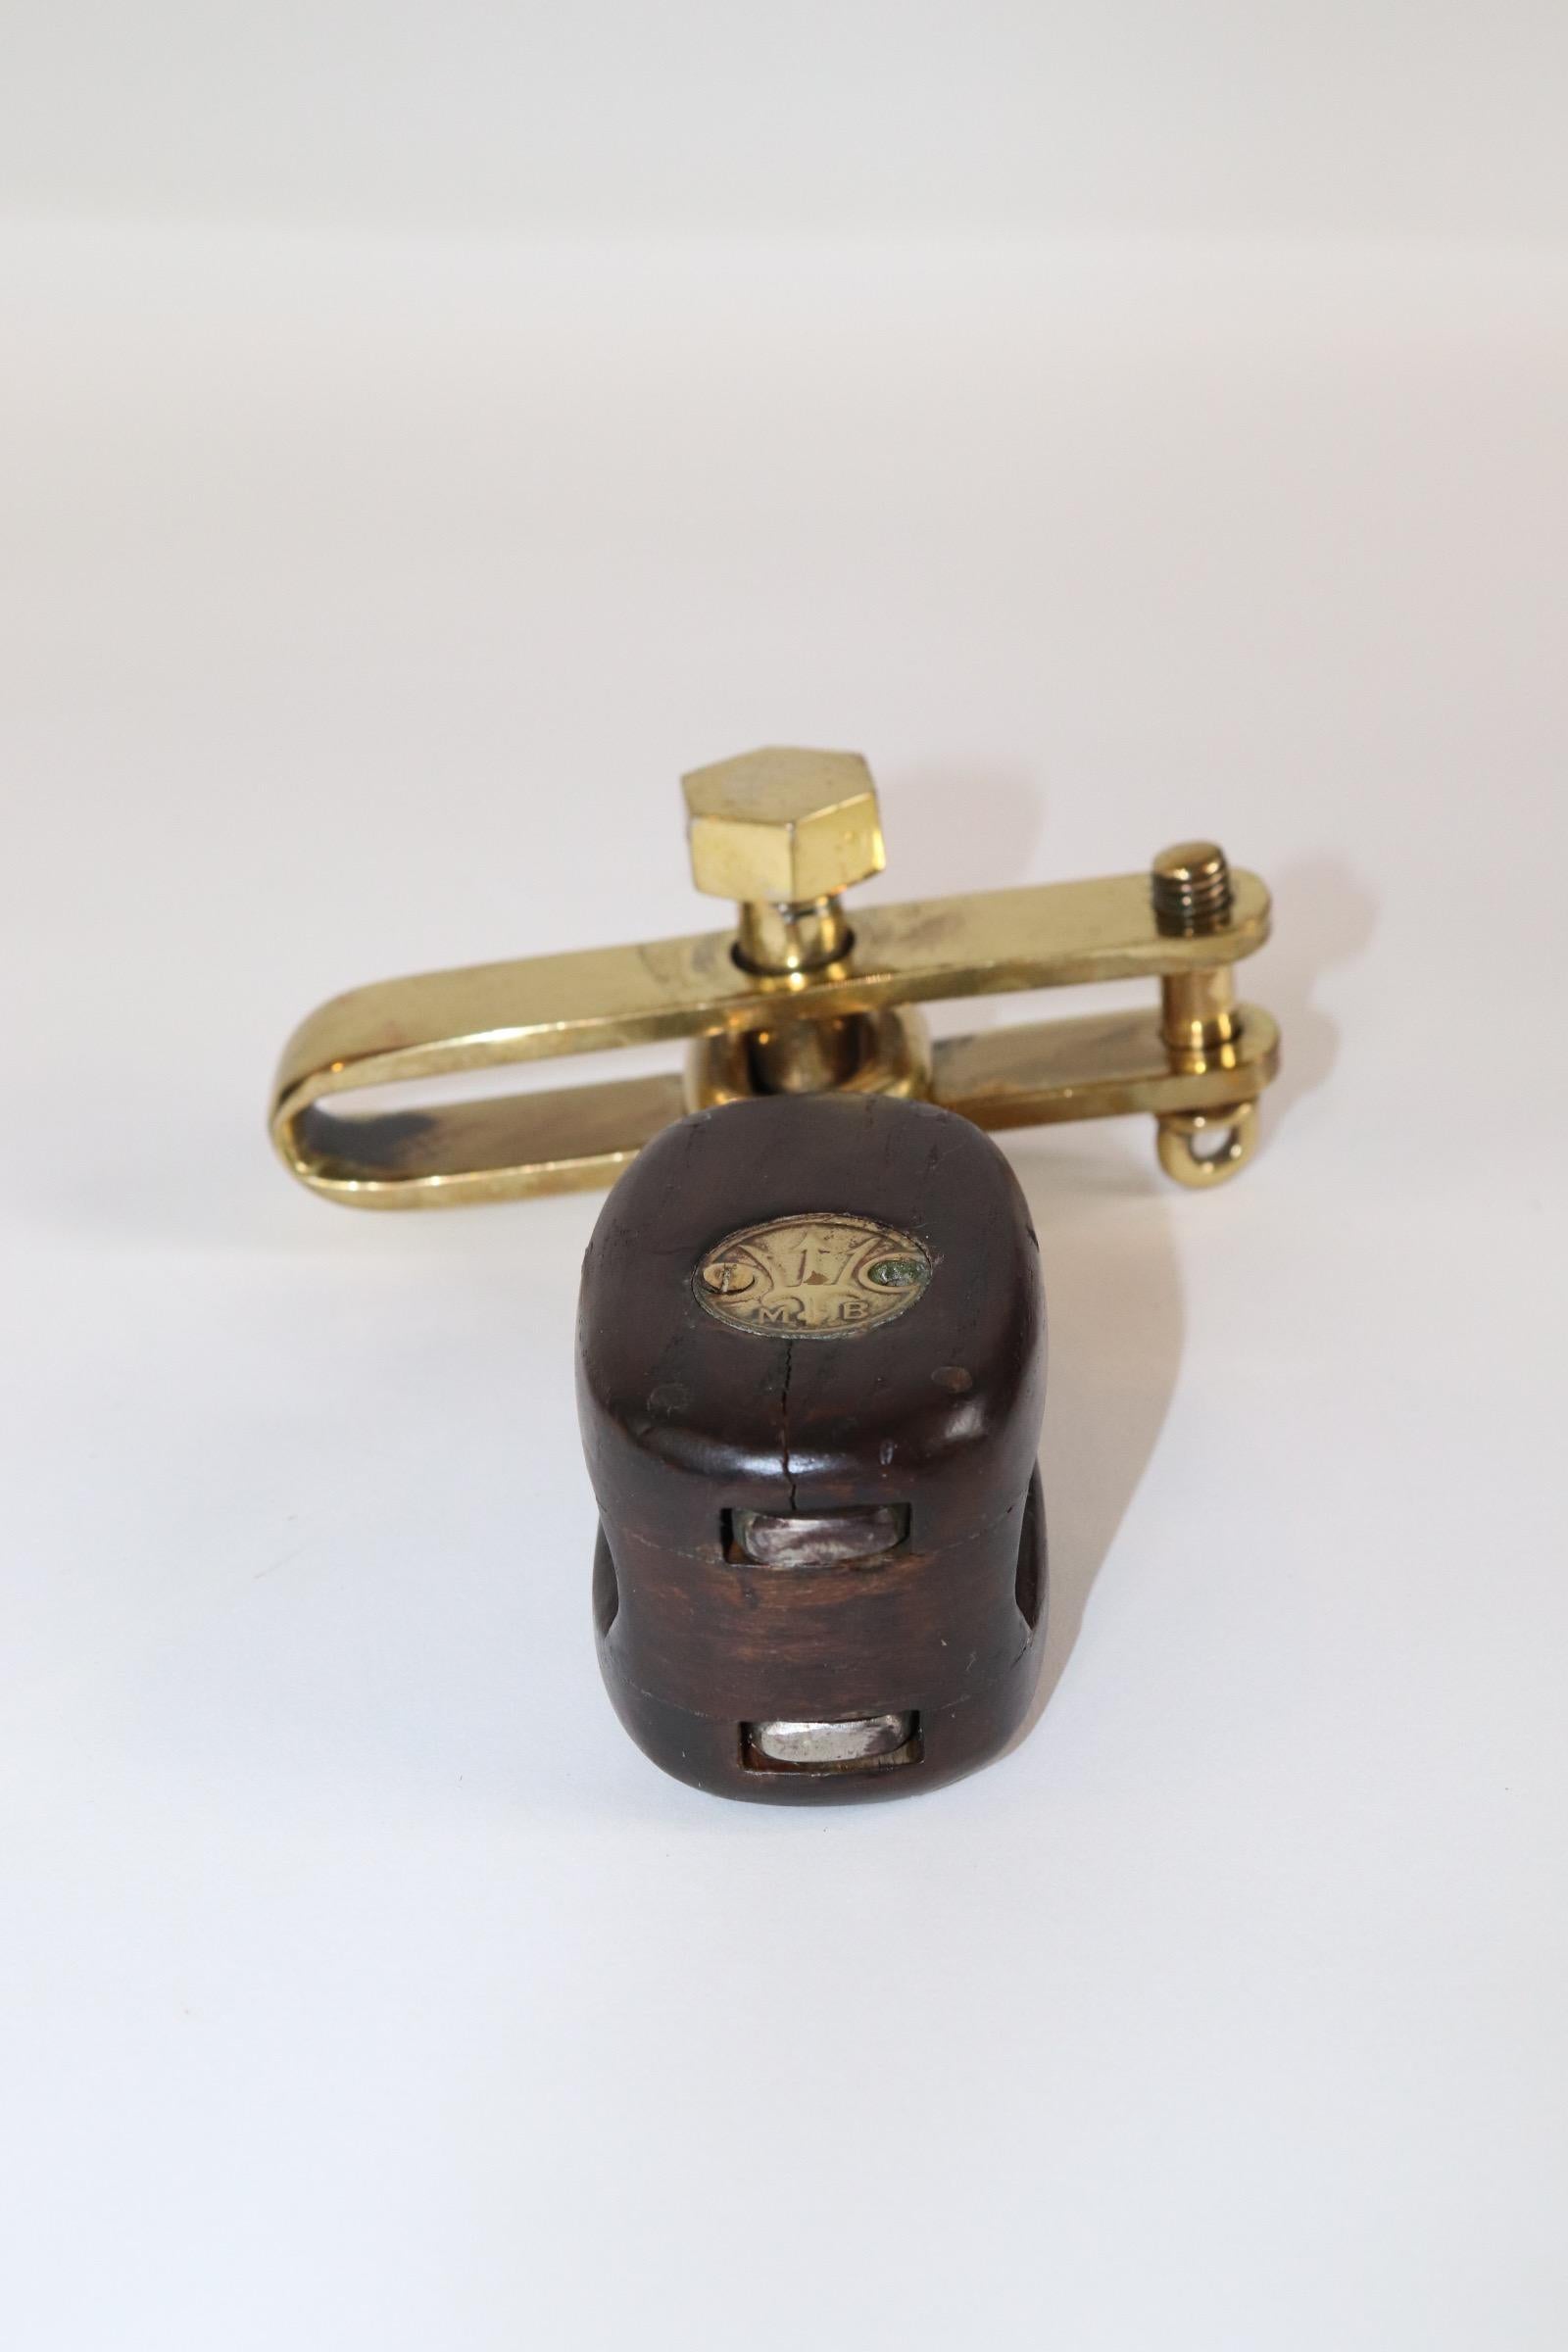 Old Merriman Brothers wood pulley block from a yacht. With brass caps with the Merriman Trident logo. Other polished brass hardware is attached. Weight is 2 pounds. X-135